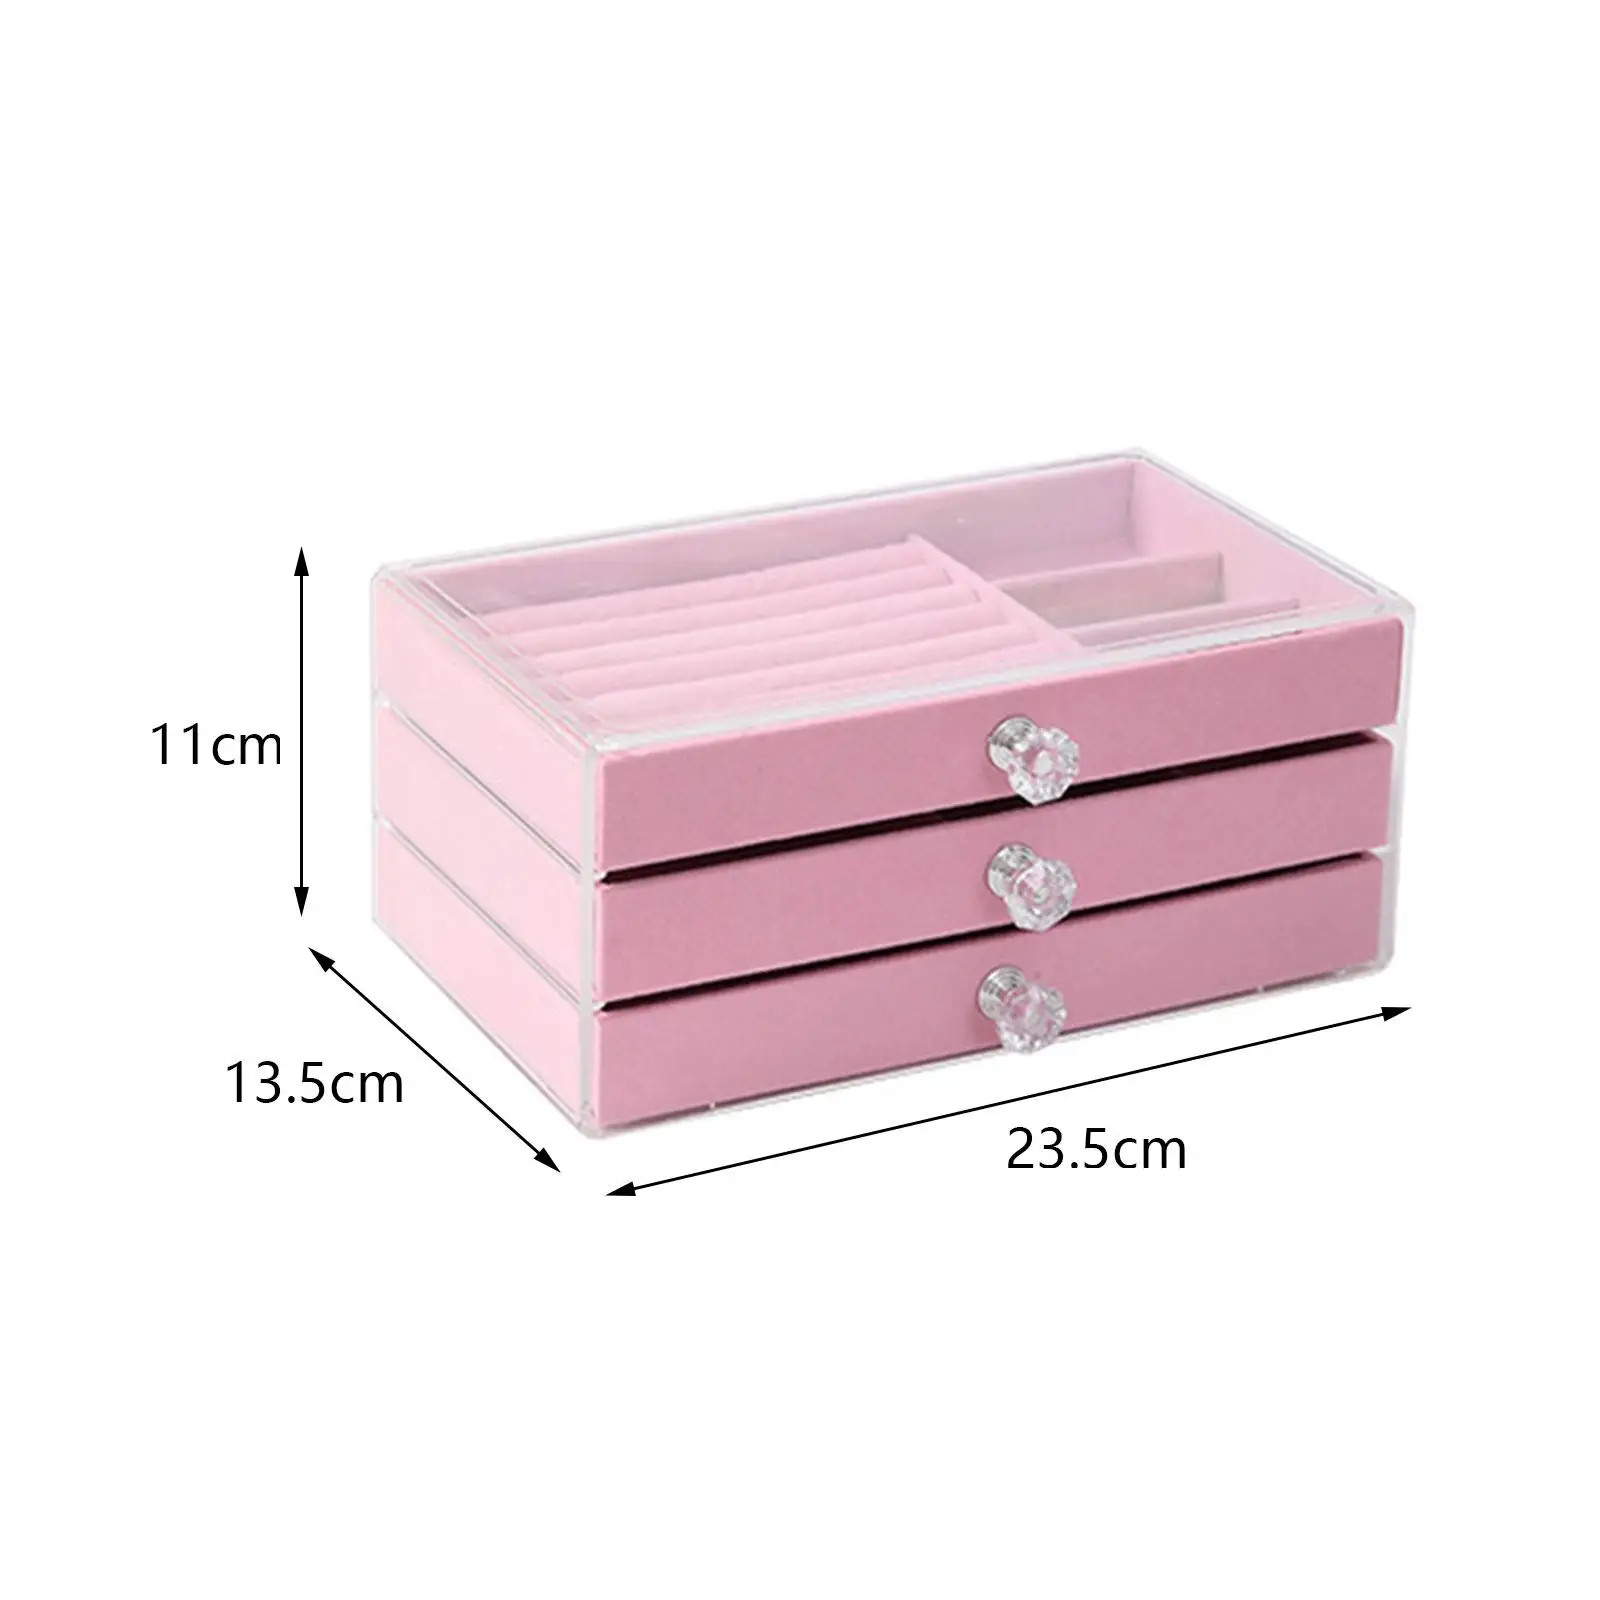 Portable Jewelry Box for Women Girls with Mirror Earrings Watches for Necklace Rings Acrylic Large Jewelry Organizer Home Travel